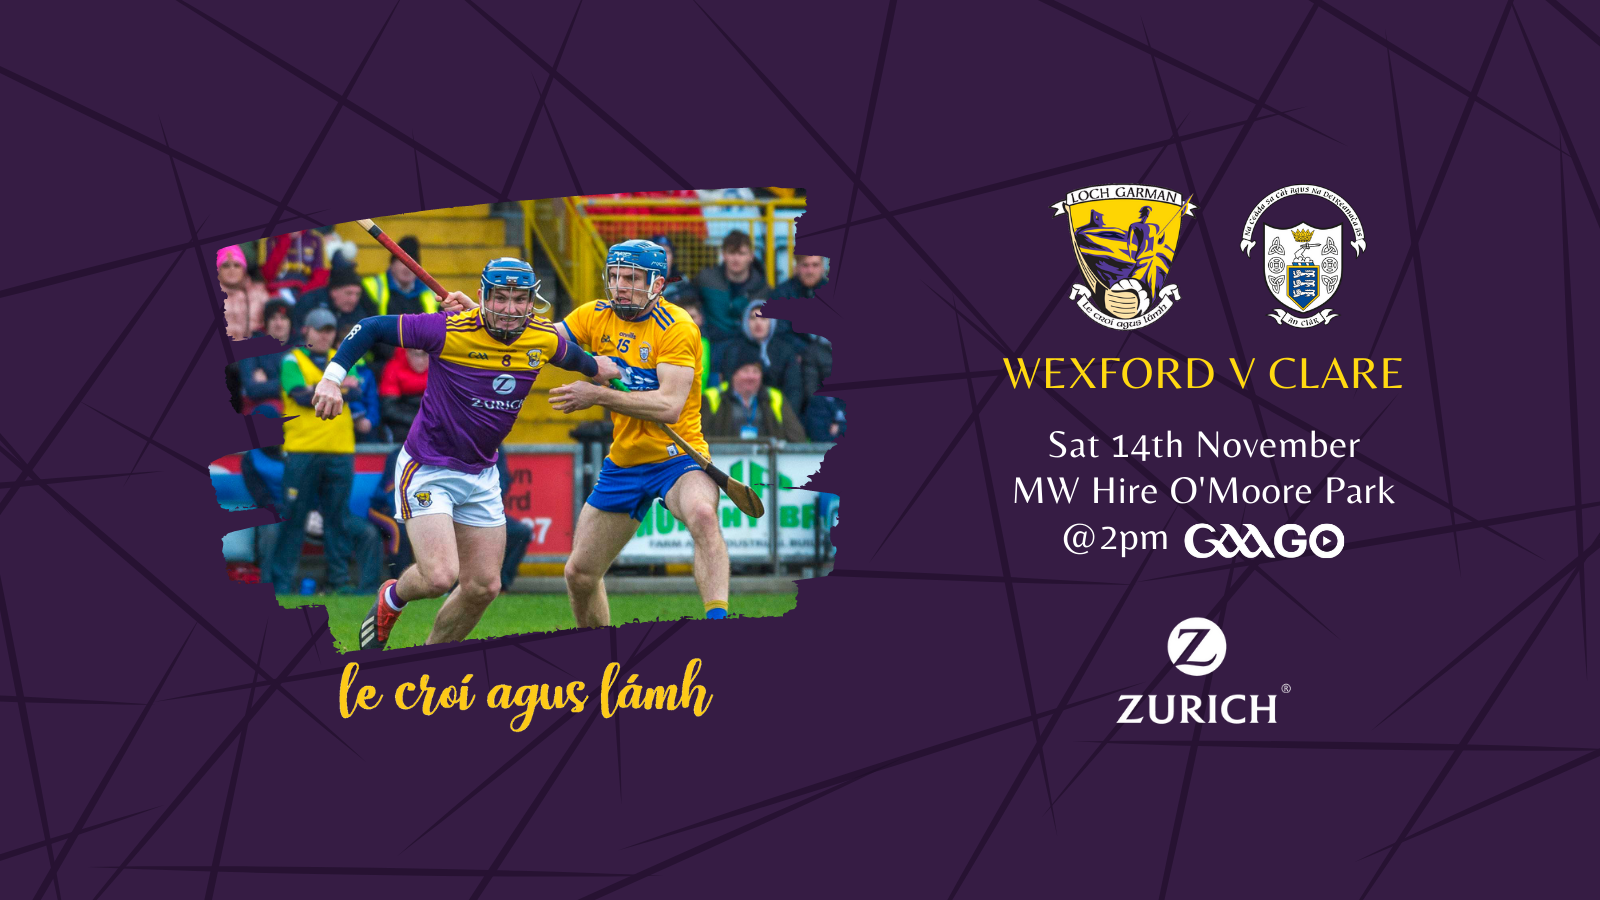 Wexford draw Clare in Rd 2 of the Hurling Qualifiers